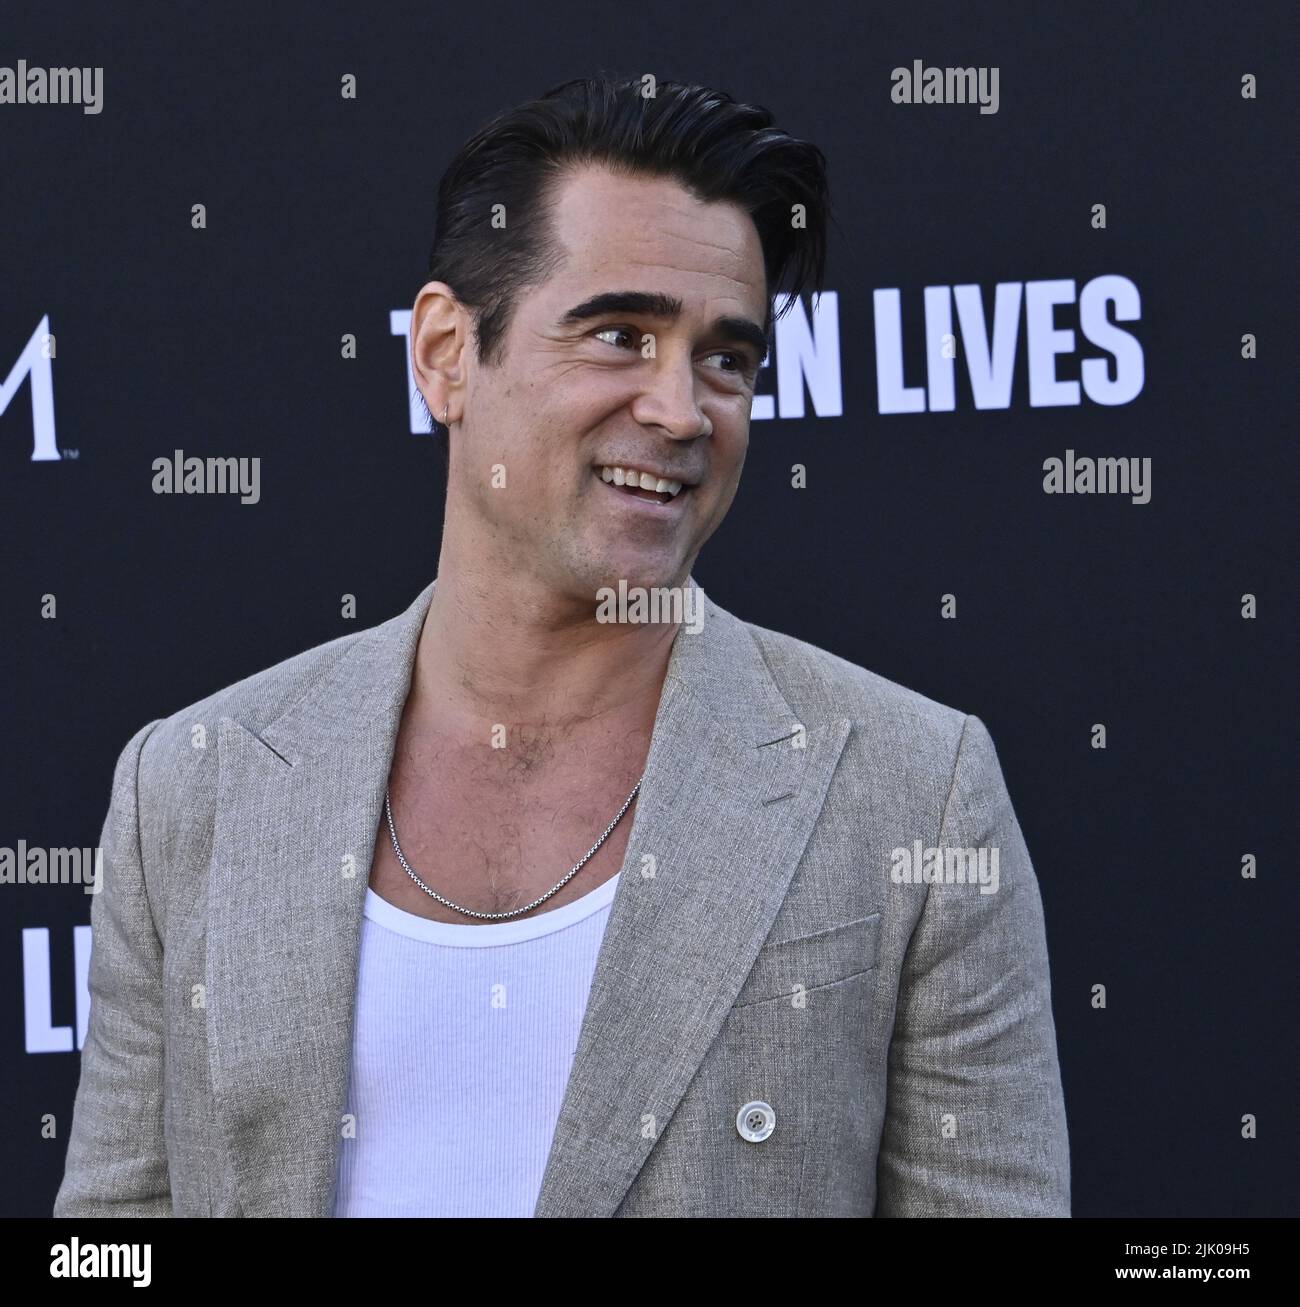 Los Angeles, United States. 29th July, 2022. Cast member Colin Farrell  attends the premiere of Prime Video's biographical thriller 